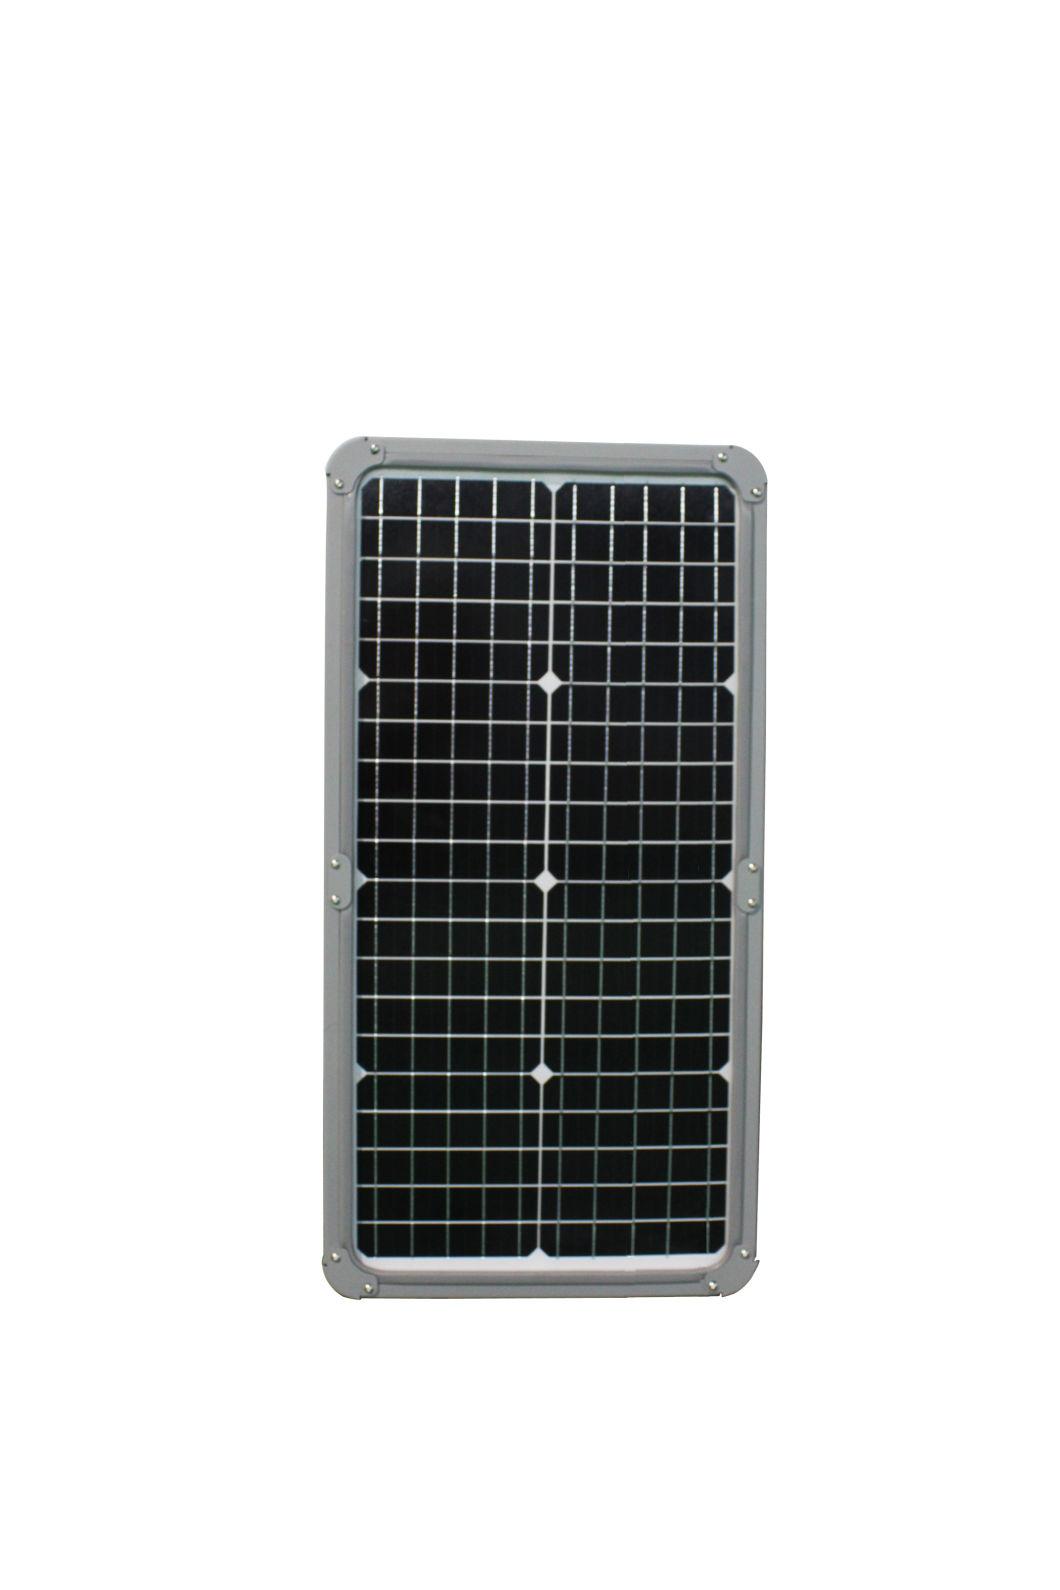 Integrated IP66 Waterproof Outdoor Solar Panel Road Lamp All in One Solar LED Street Light 50W 80W